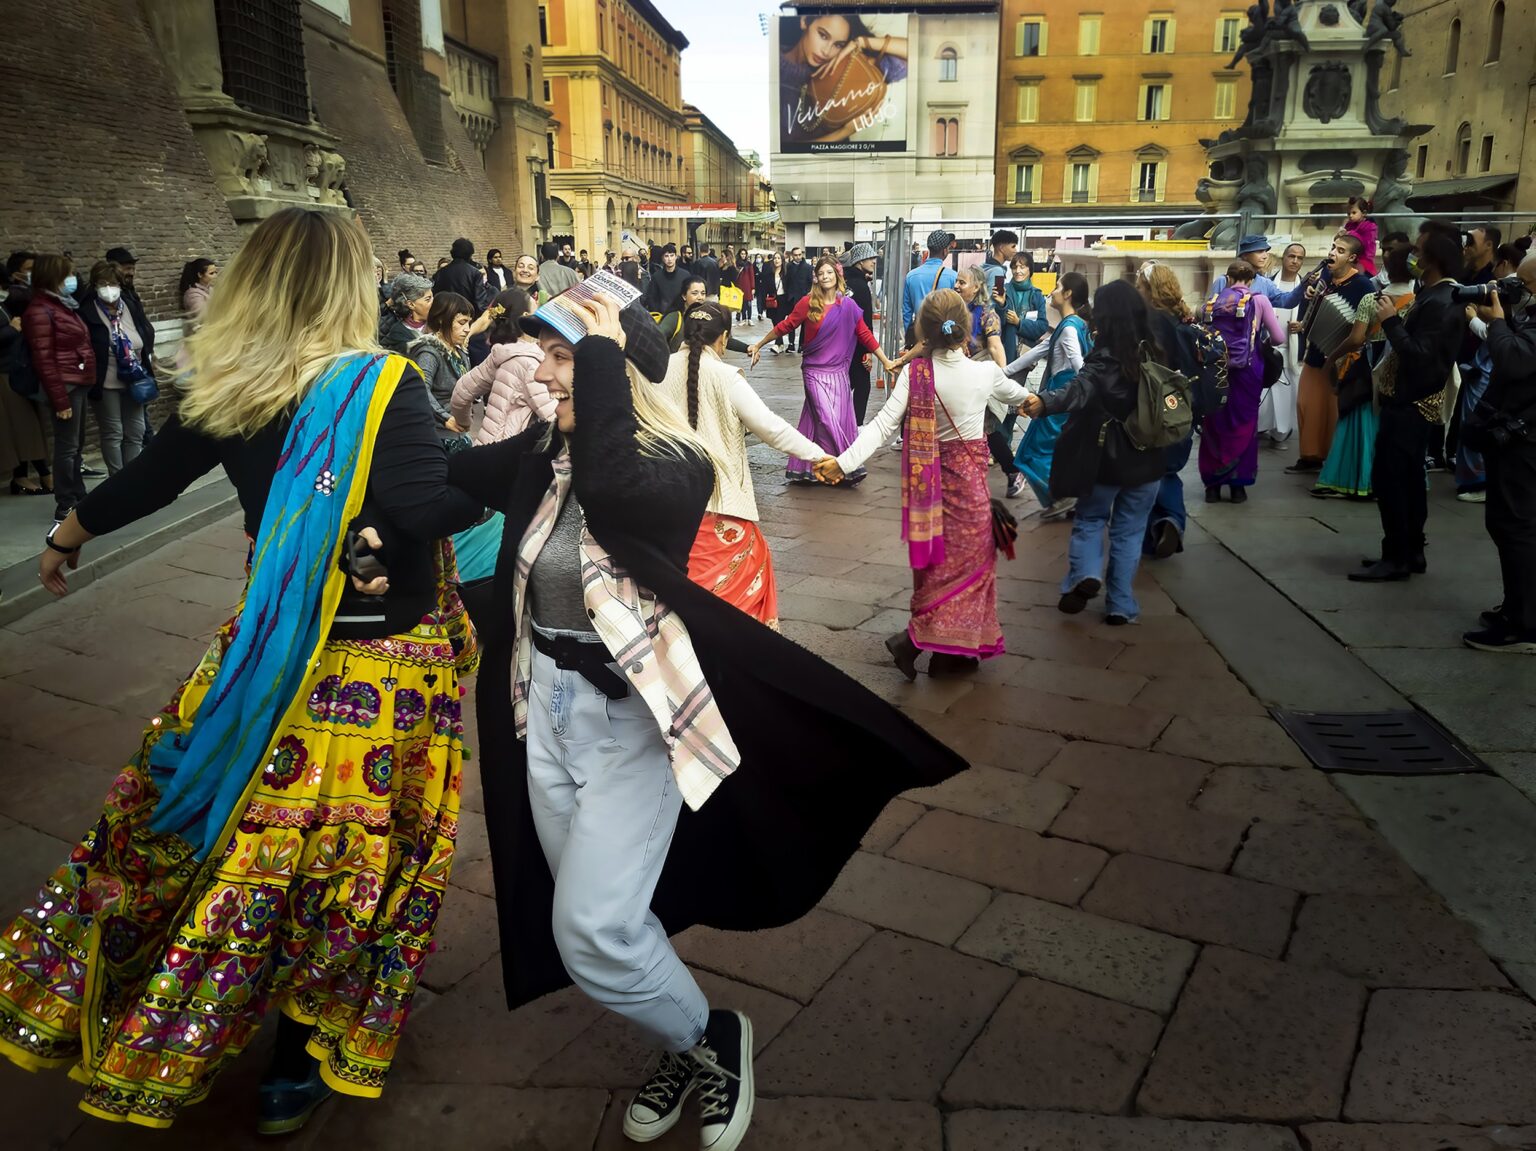 Bologna++SPREAD+THE+LOVE++A+Hari+Krishna+group+gathers+tourists+and+shares+the+love+to+all